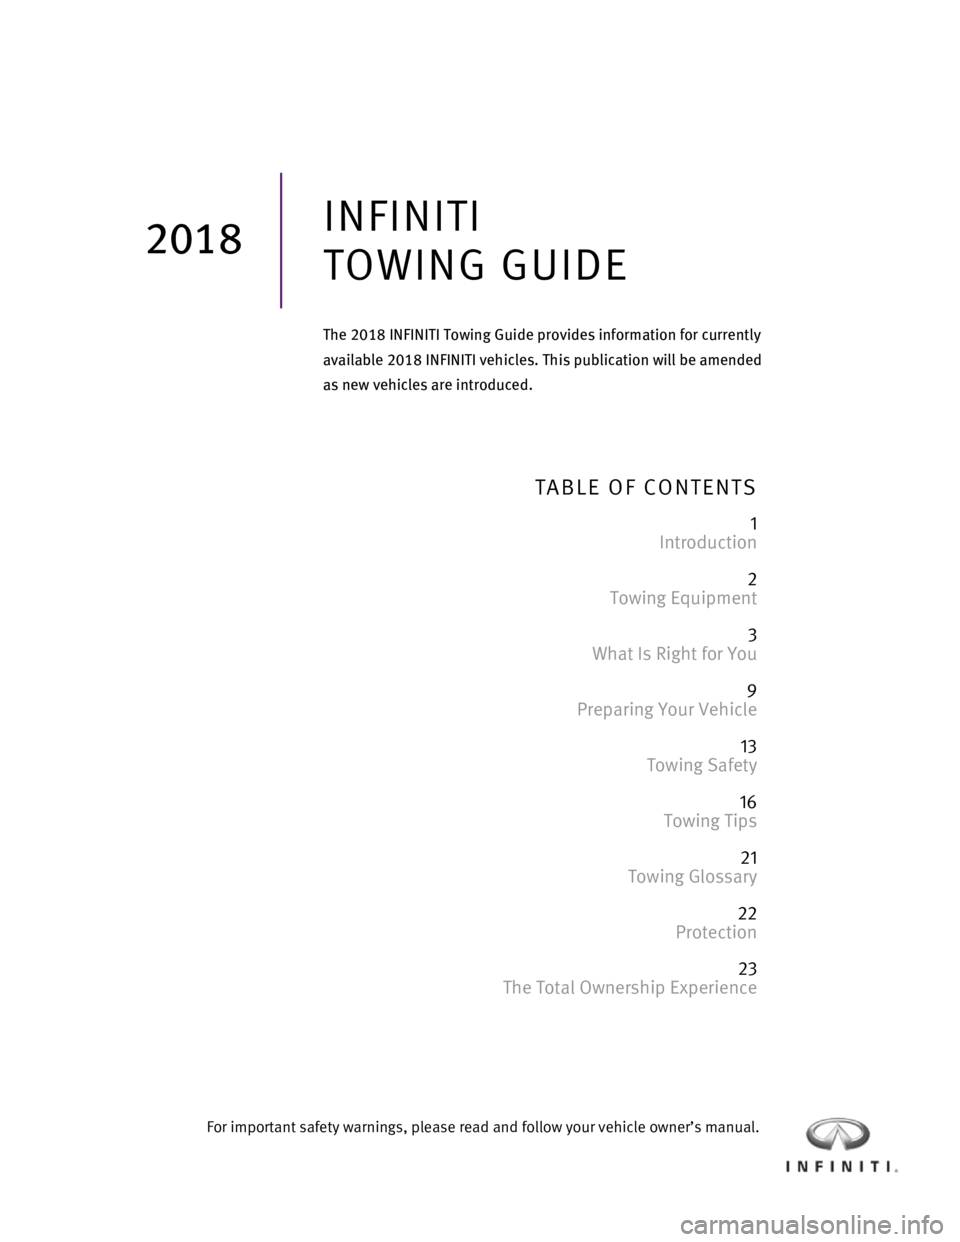 INFINITI Q70 2018  Towing Guide   
 
 
 
 
 
 
 
 
 
TABLE OF CONTENTS  
 
1 
Introduction 
 
2 
Towing Equipment 
 
3 
What Is Right for You 
 
9 
Preparing Your Vehicle 
 
13 
Towing Safety 
 
16 
Towing Tips 
 
21 
Towing Glossar